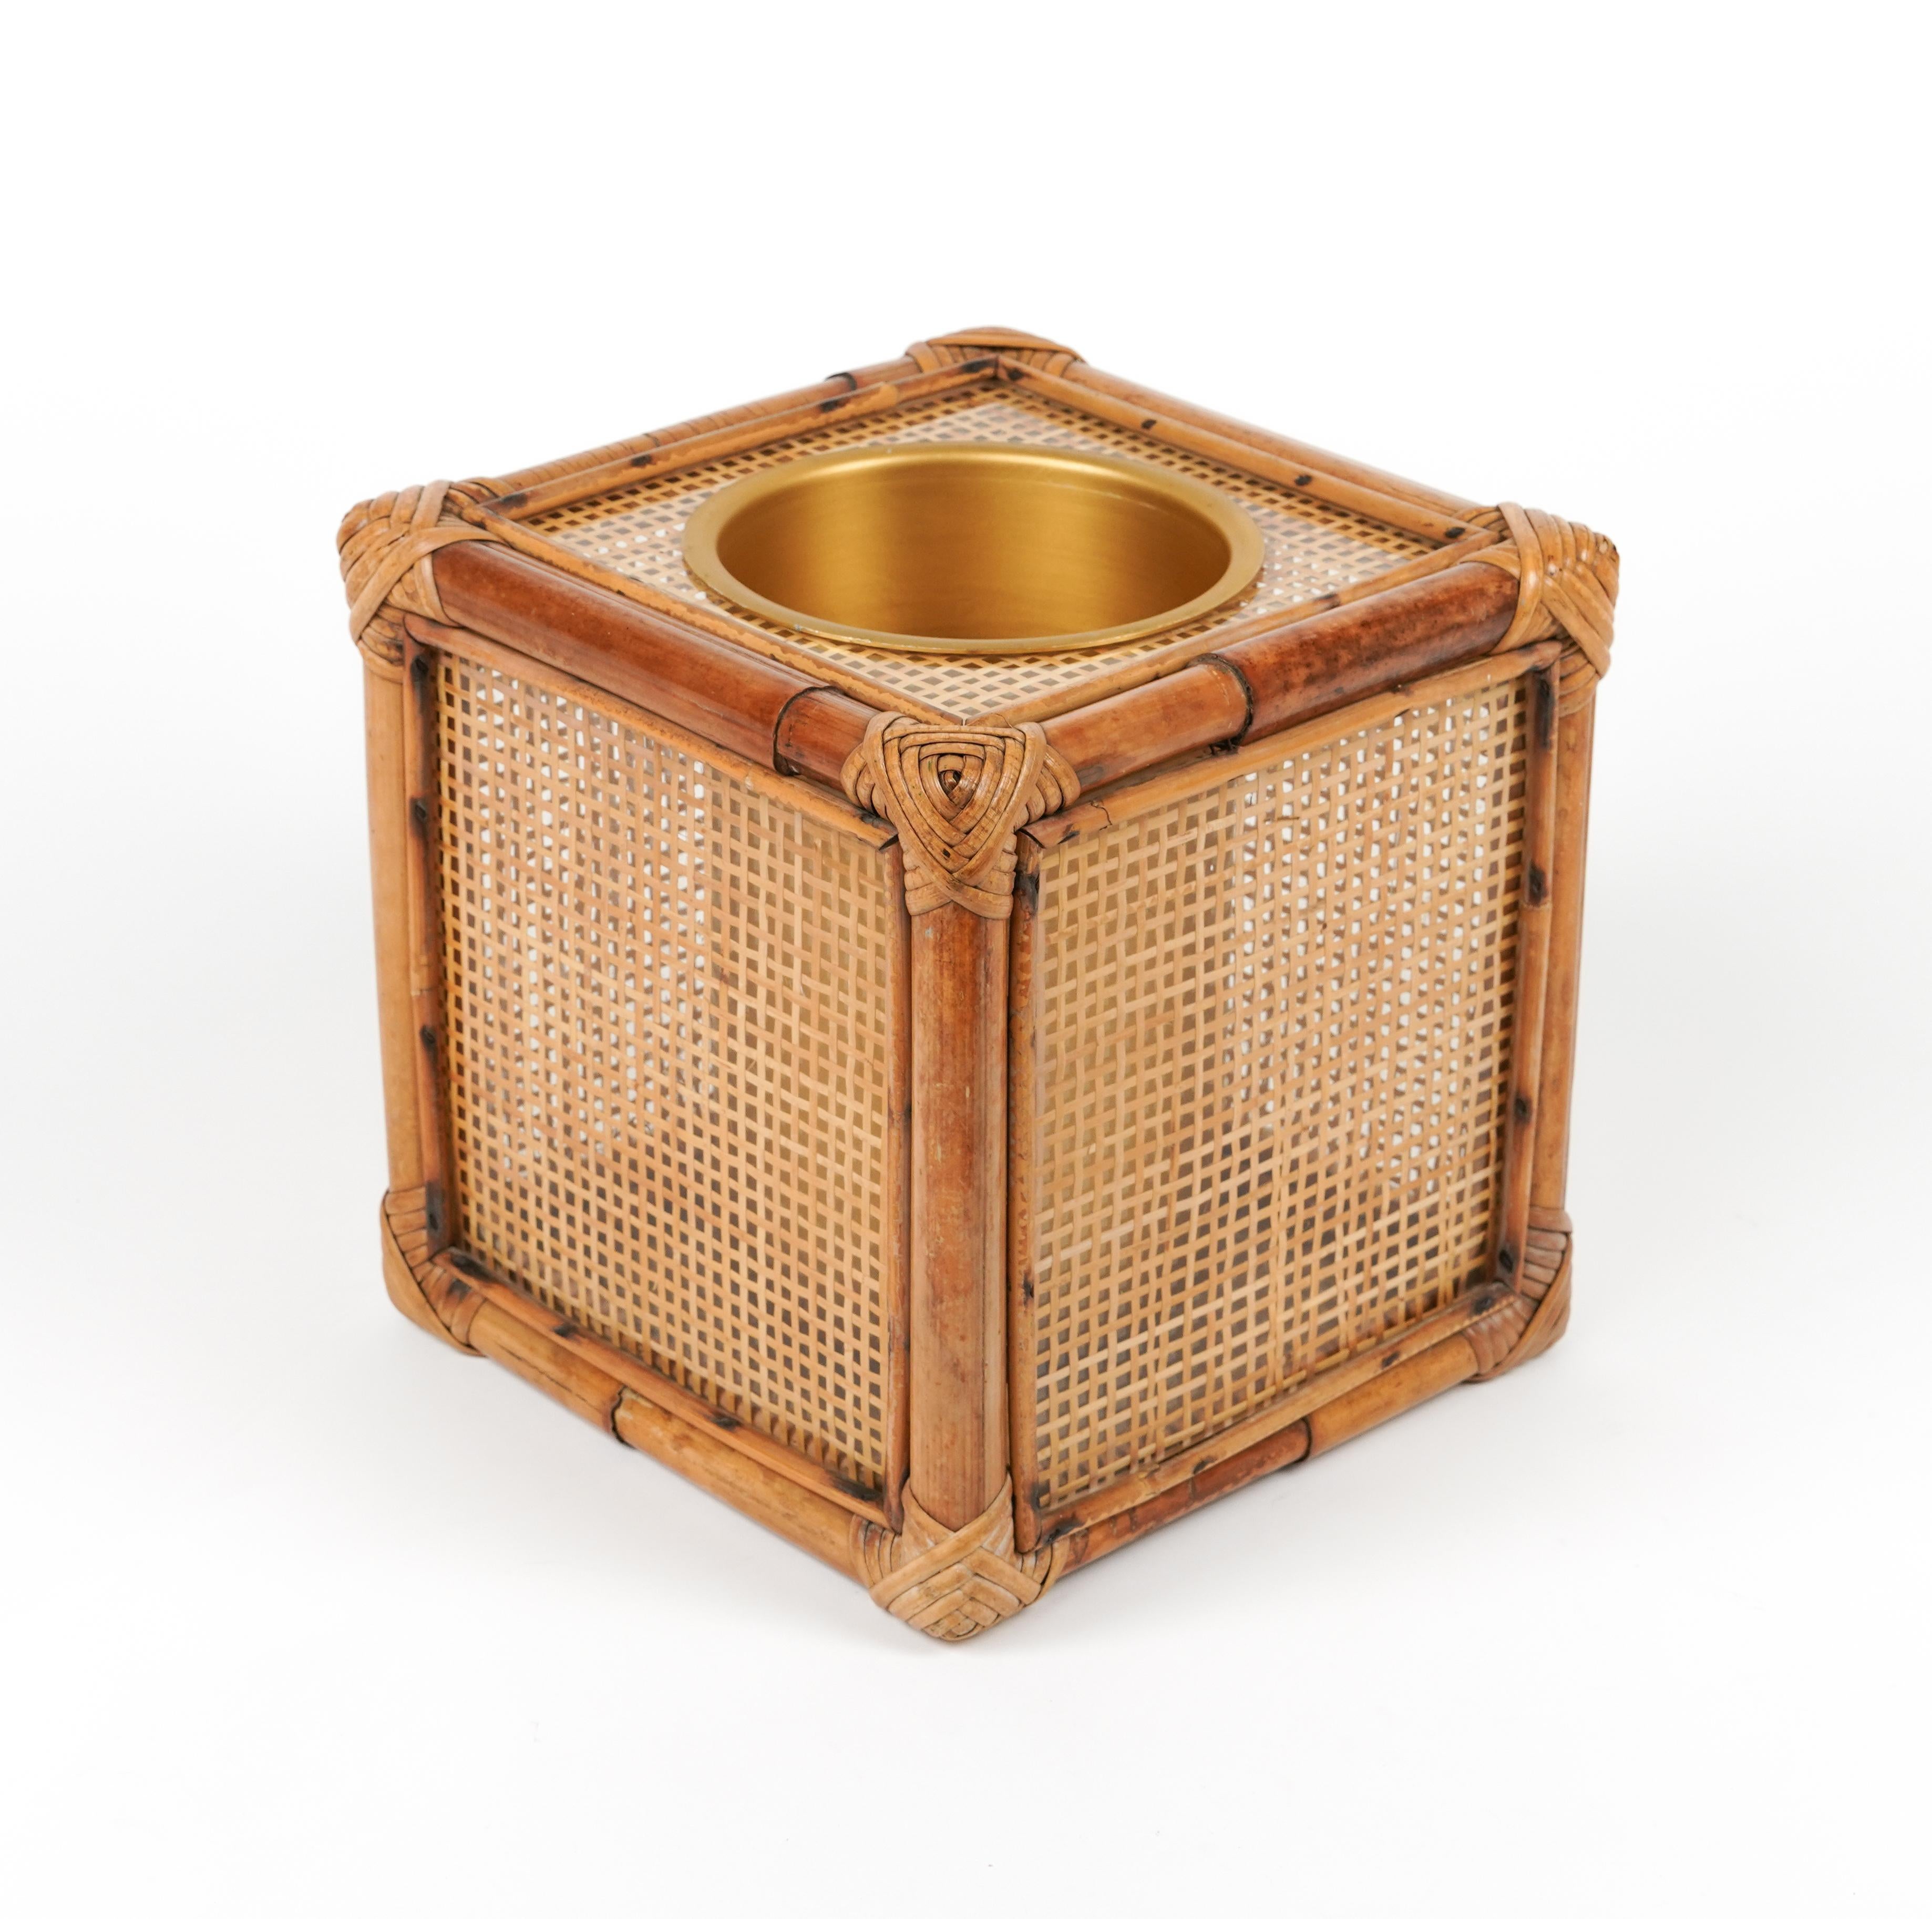 Late 20th Century Ice Bucket in Bamboo, Rattan and Lucite Christian Dior Style, Italy 1970s For Sale